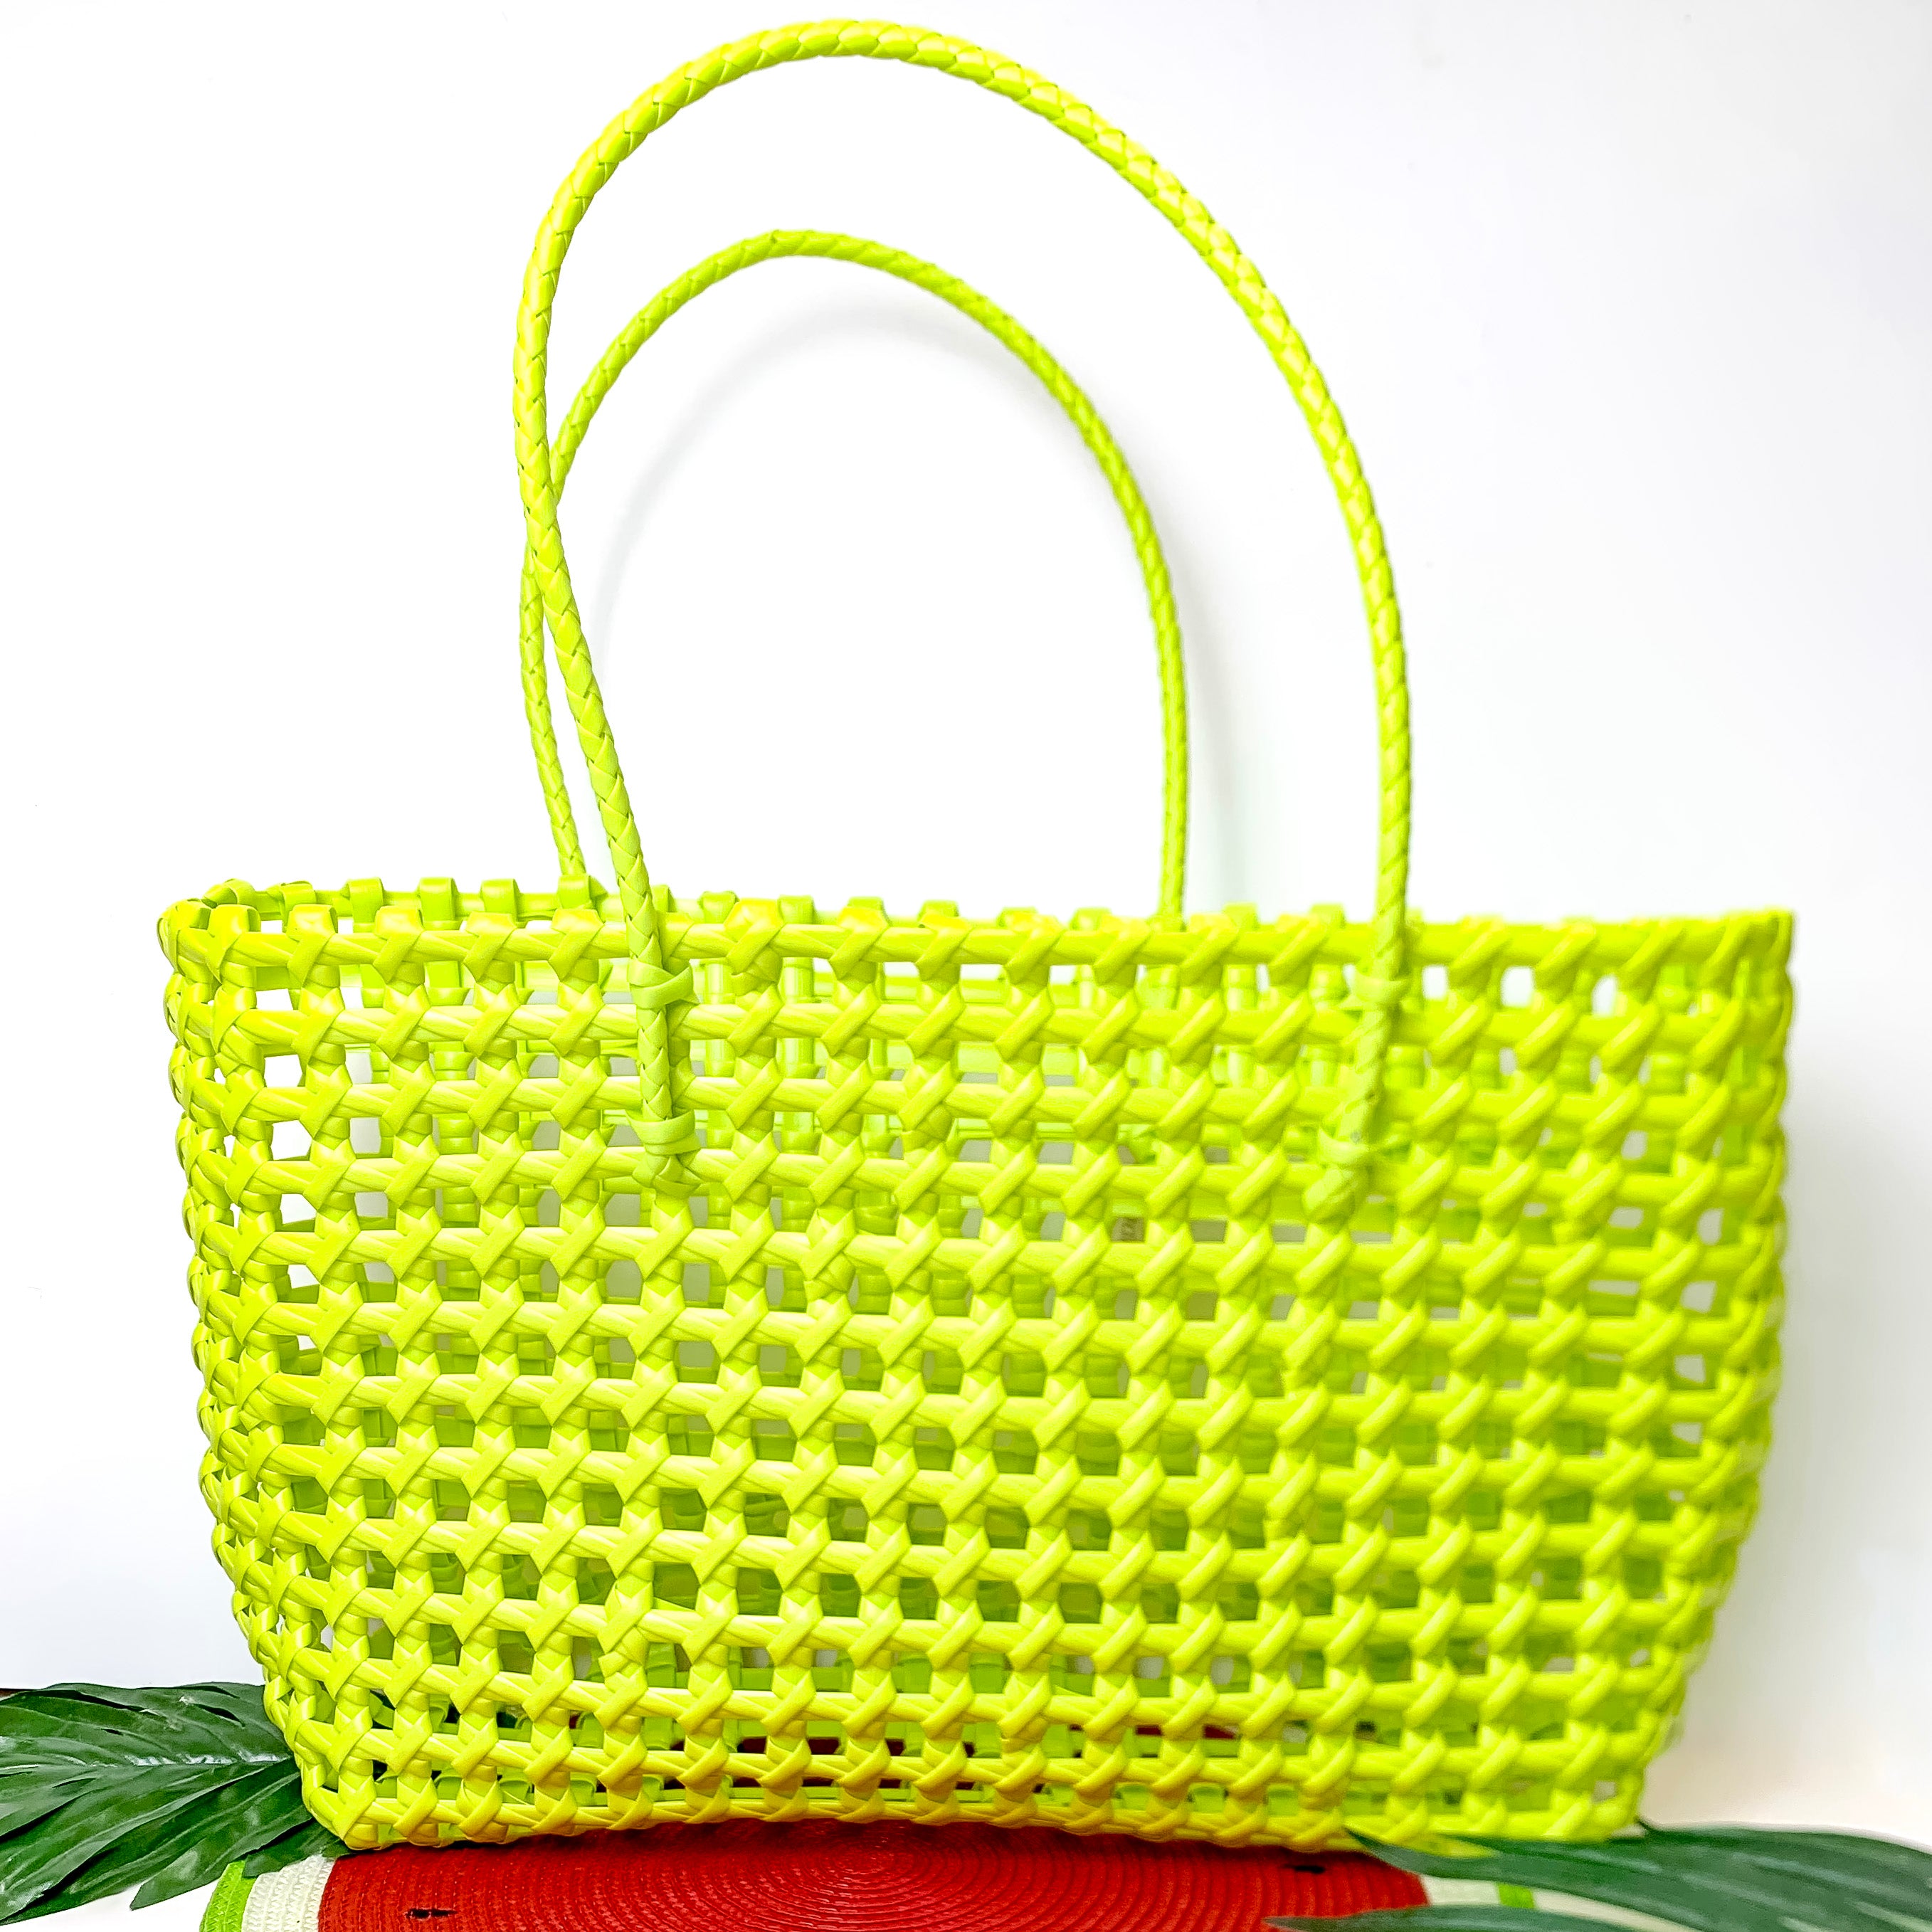 Beachy Brights Basket Tote Bag in Lime Green - Giddy Up Glamour Boutique